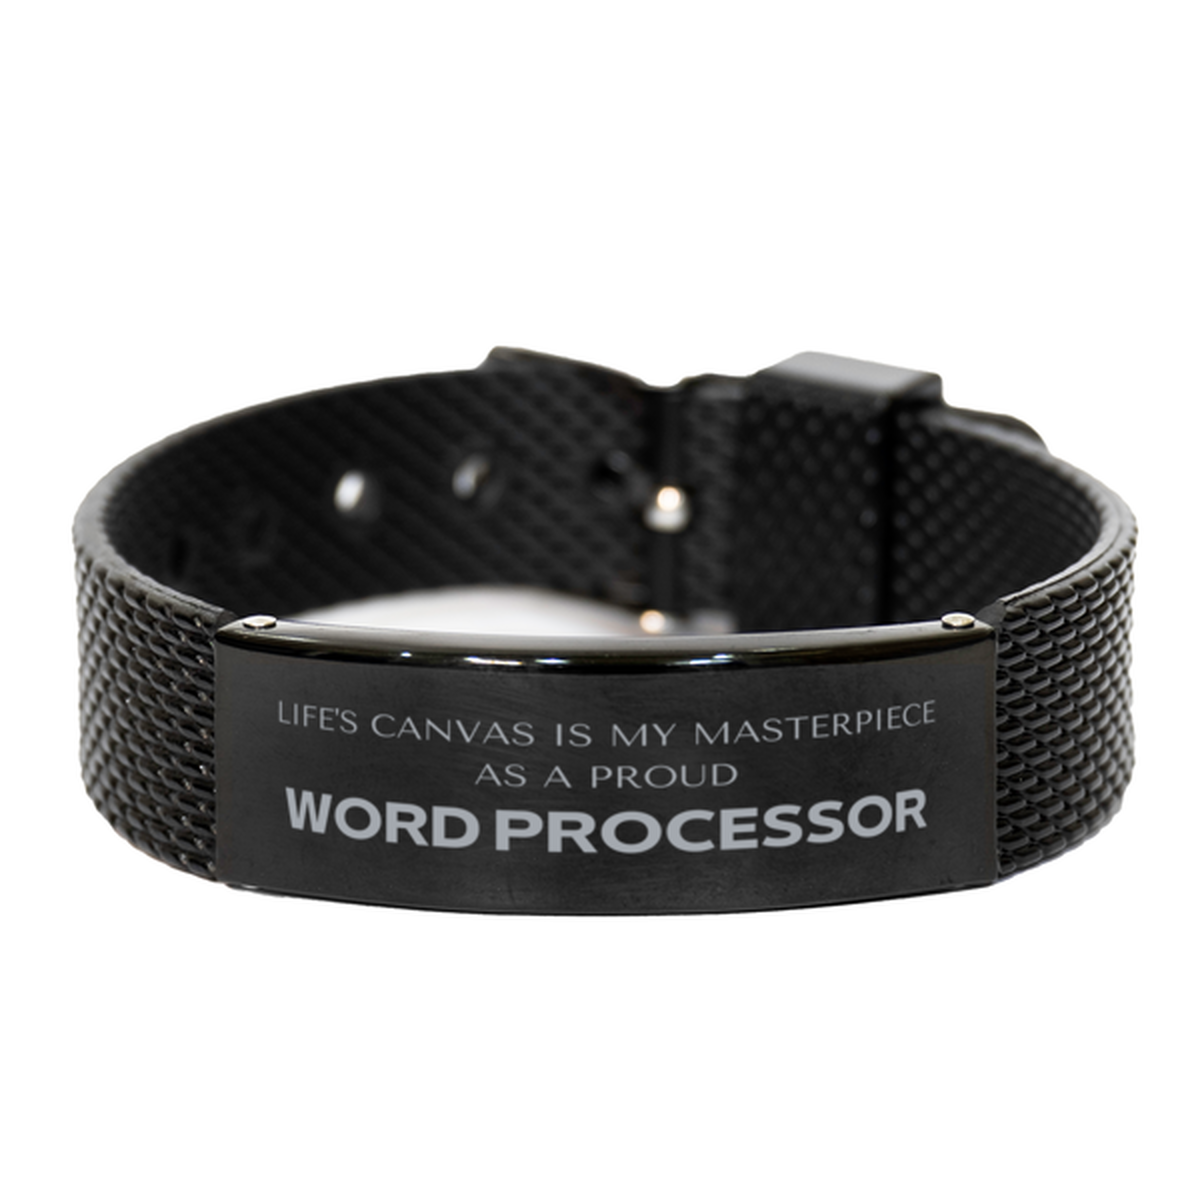 Proud Word Processor Gifts, Life's canvas is my masterpiece, Epic Birthday Christmas Unique Black Shark Mesh Bracelet For Word Processor, Coworkers, Men, Women, Friends